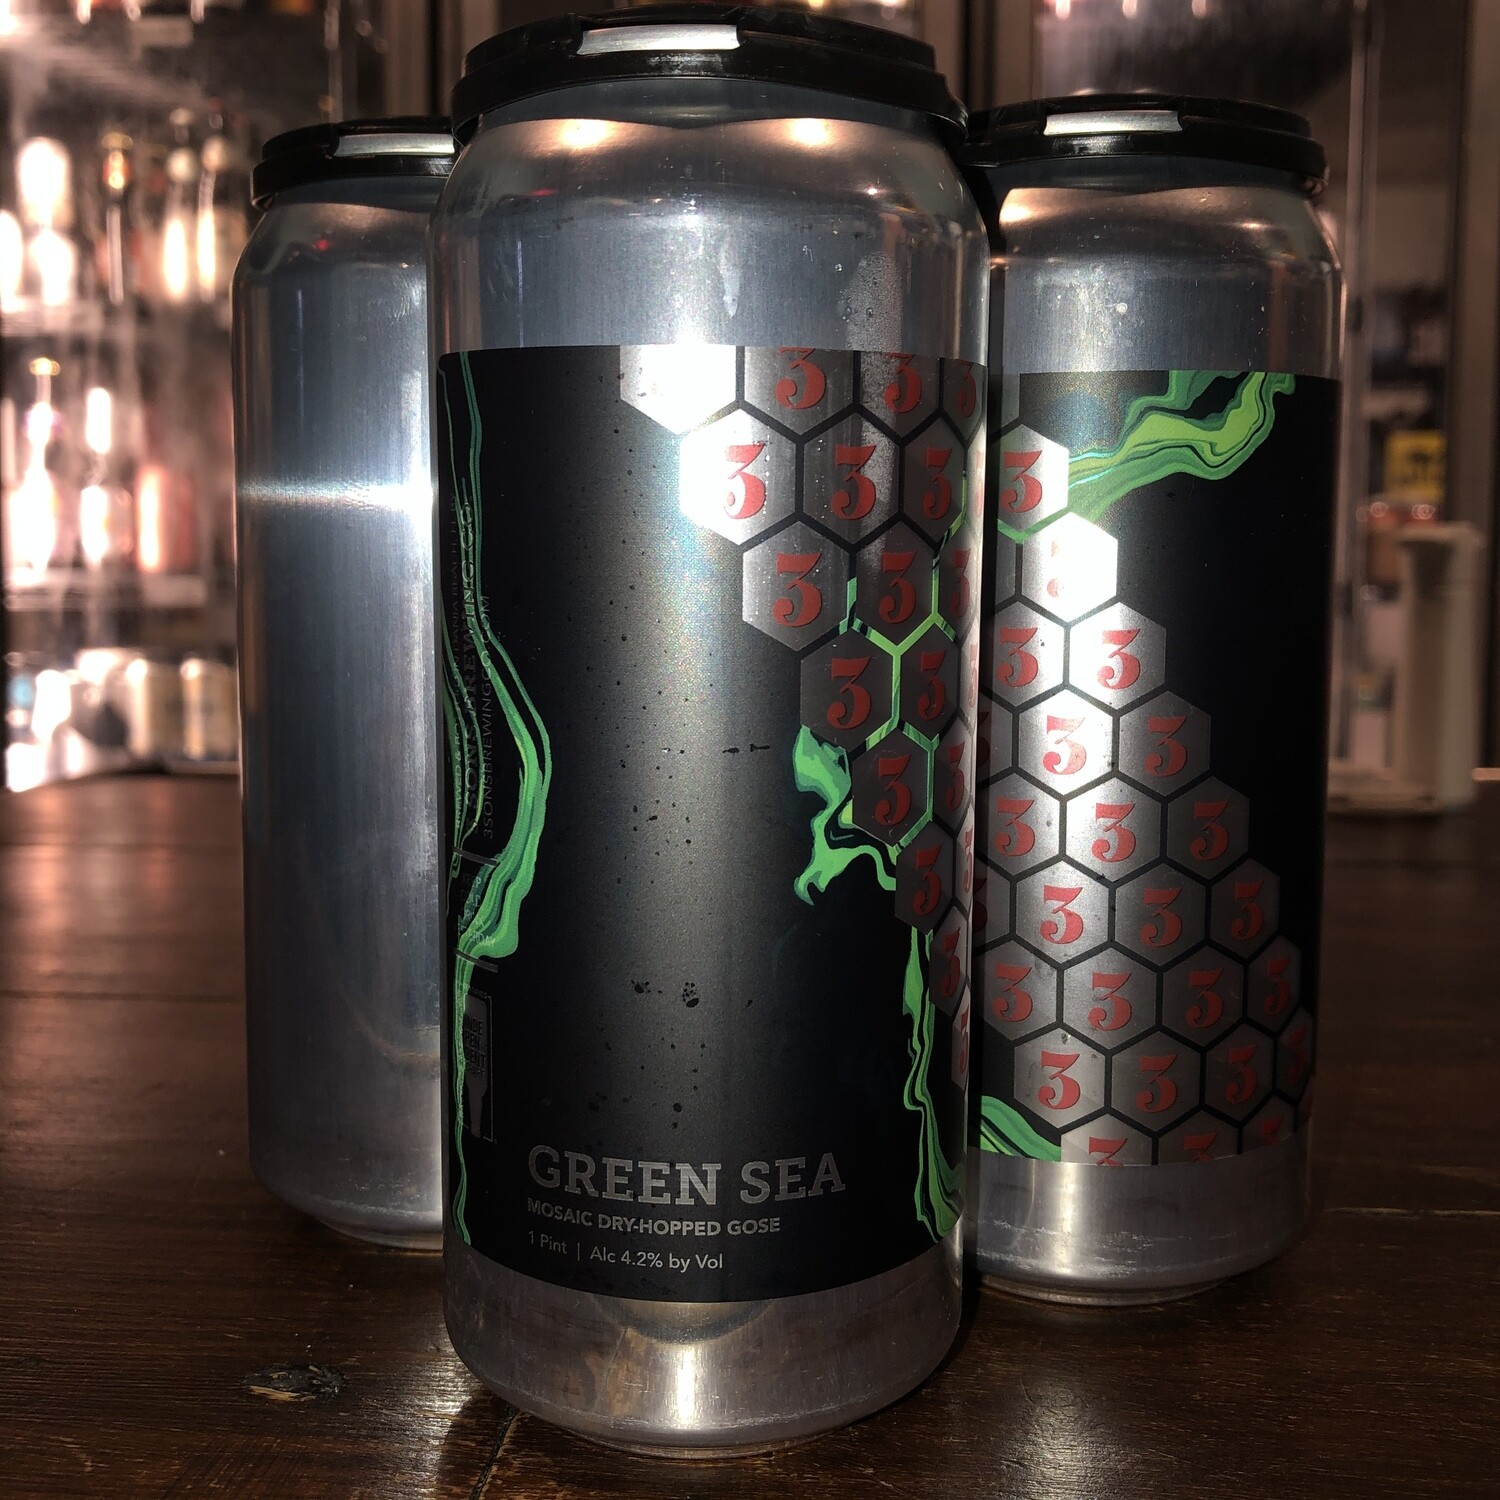 3 Sons - Green Sea Gose (4-Pack)